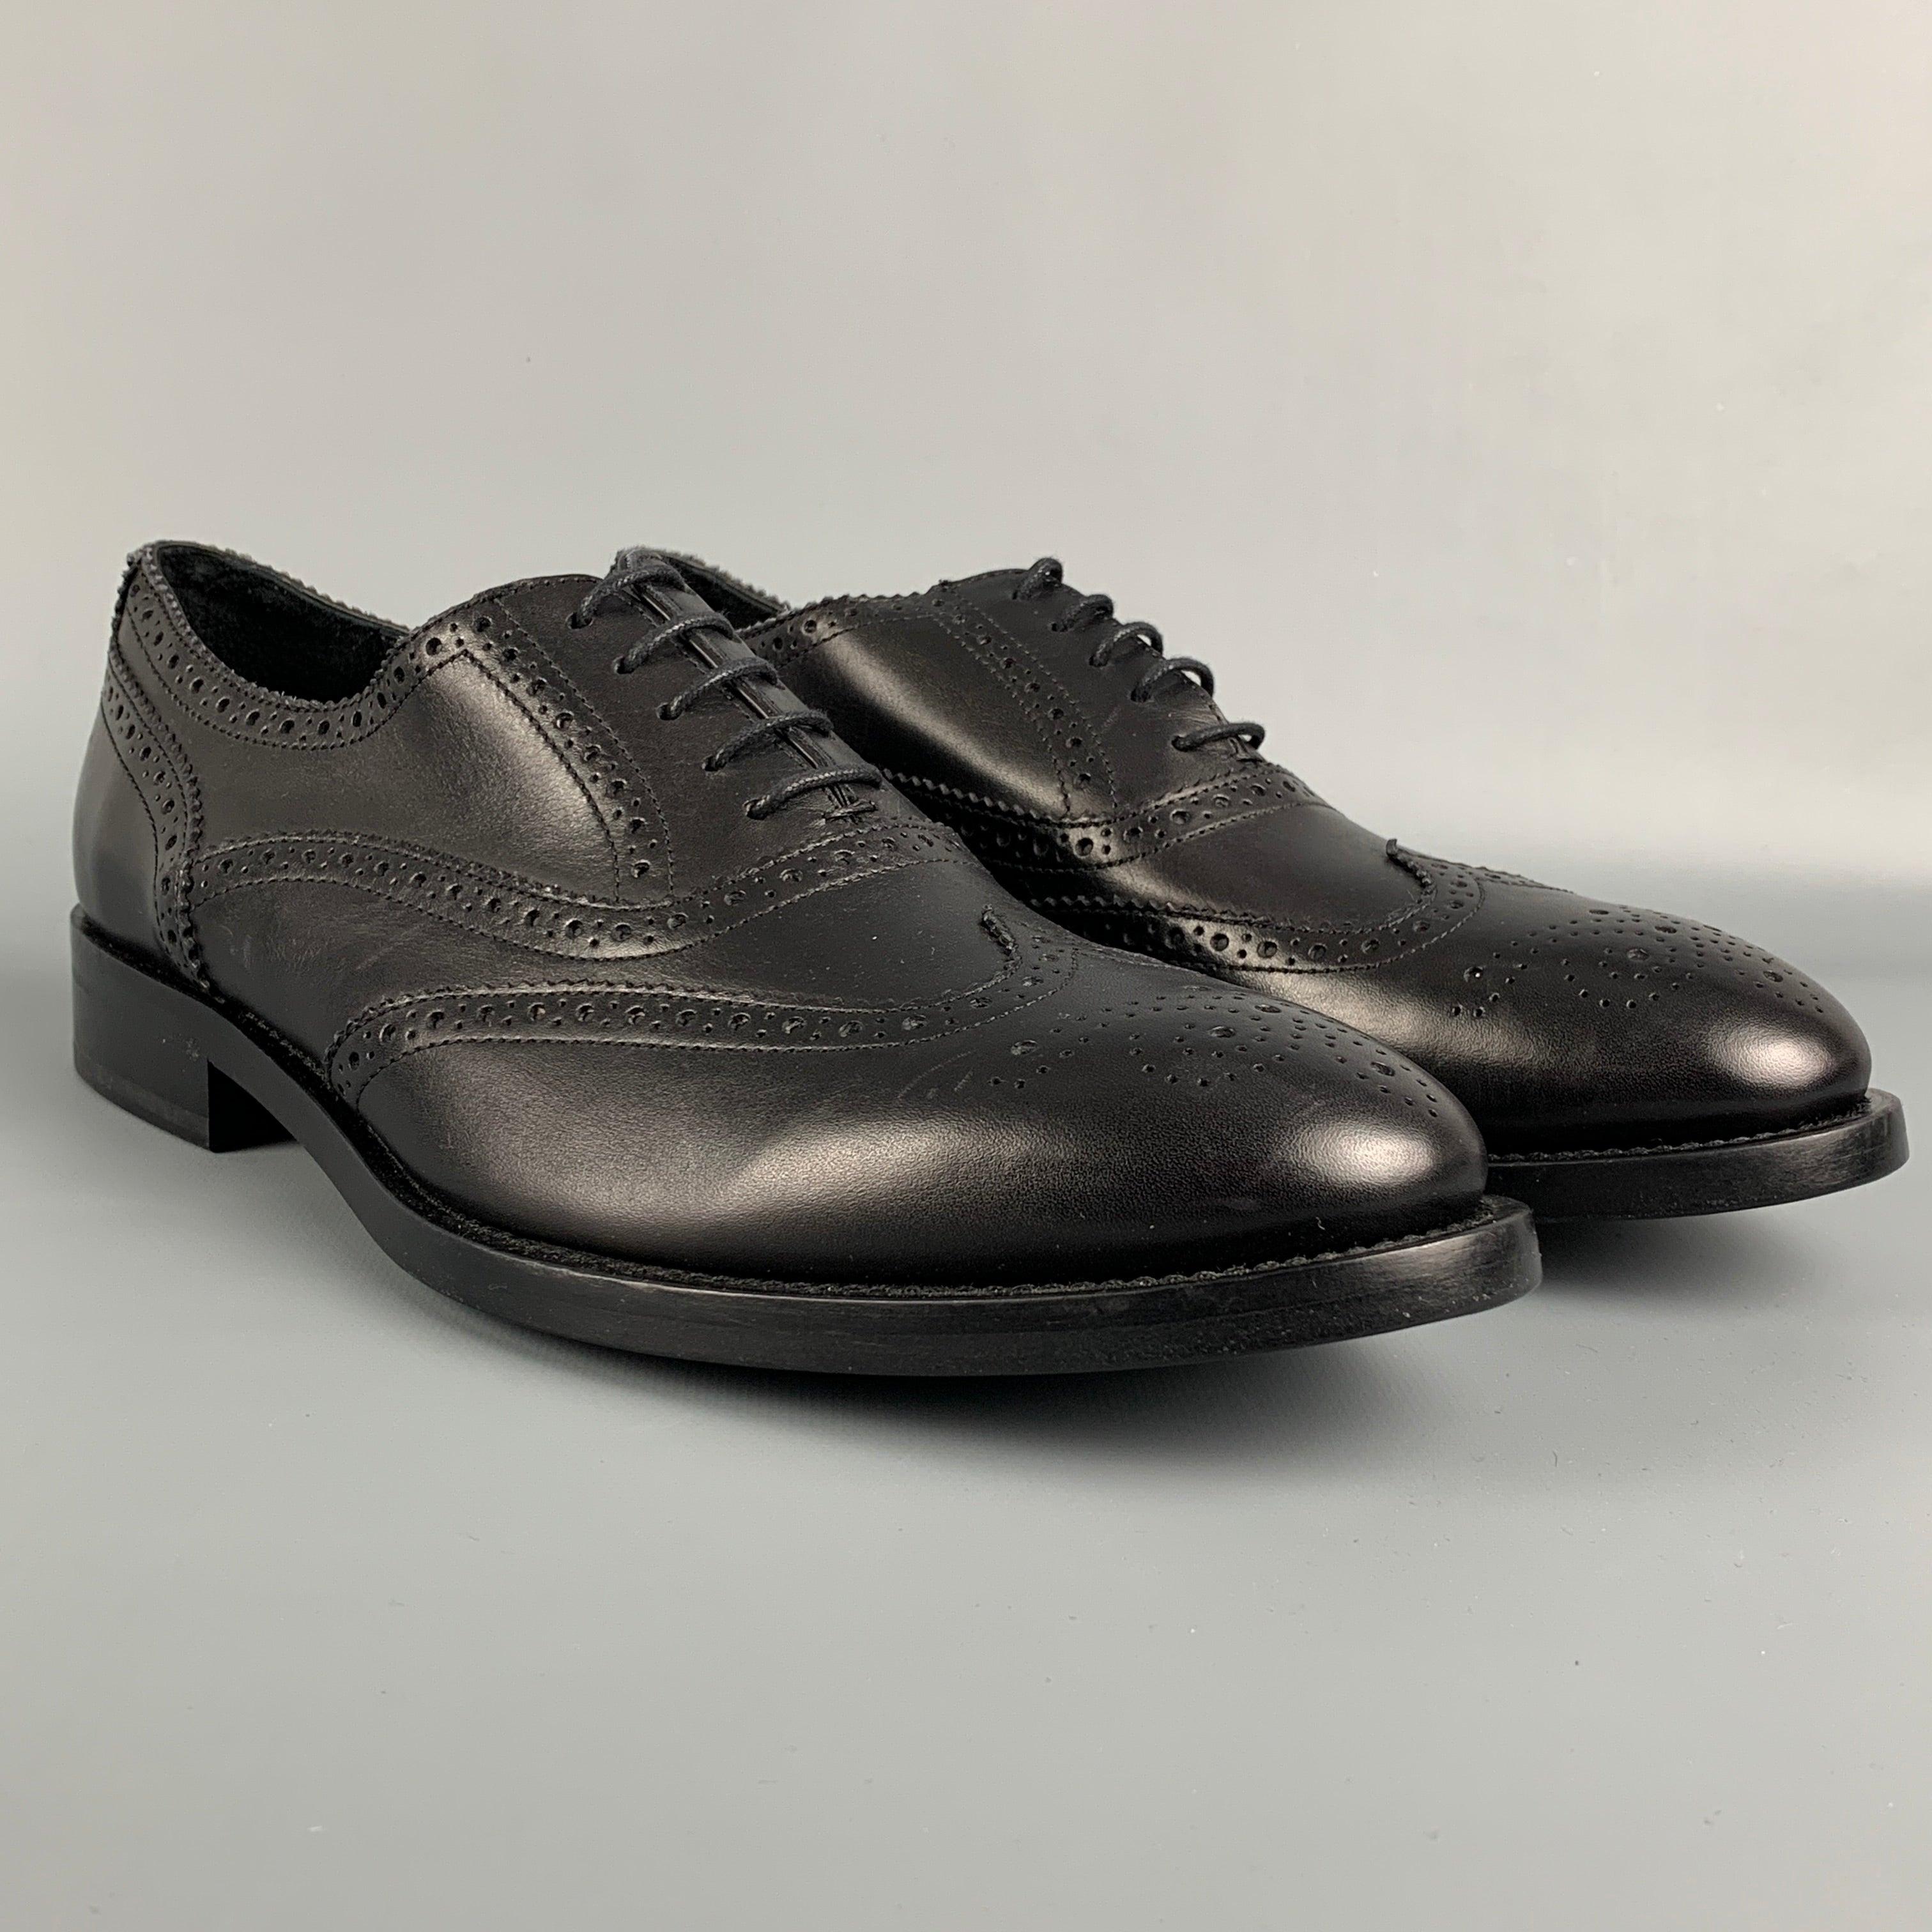 PAUL SMITH shoes comes in a black perforated leather featuring a wingtip style and a lace up closure. Made in Italy.
Excellent
Pre-Owned Condition. 

Marked:   8Outsole: 12 inches  x 4 inches 
  
  
 
Reference: 113838
Category: Lace Up Shoes
More